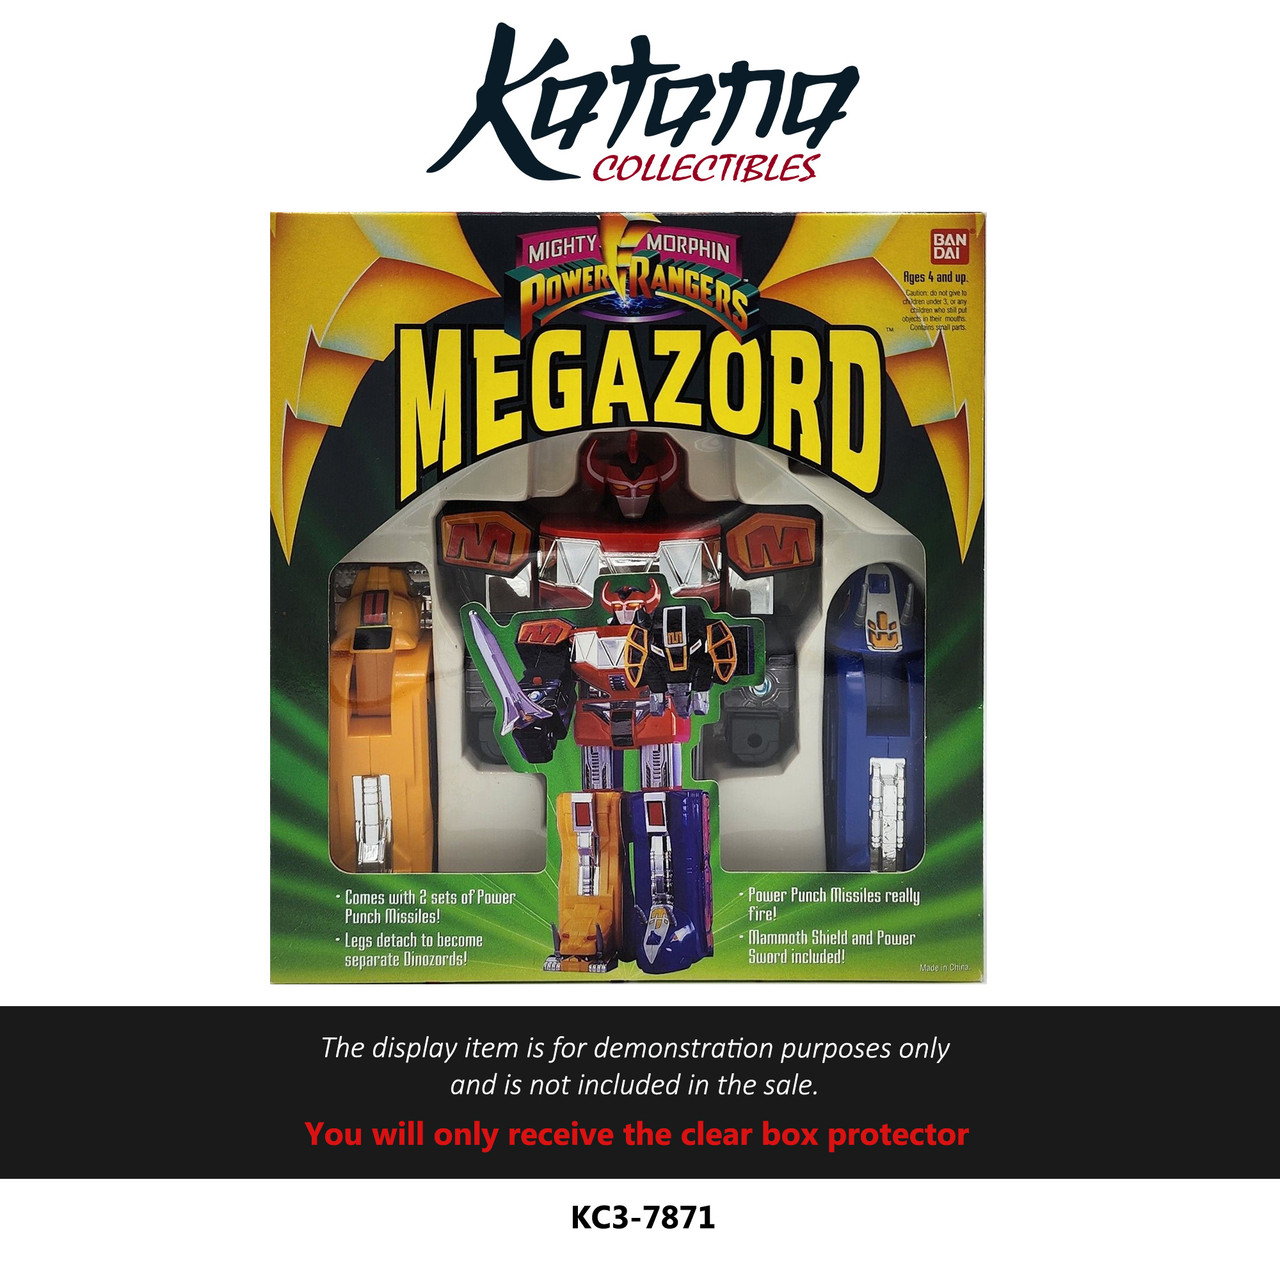 Katana Collectibles Protector For 1993 Bandai 2220 Mighty Morphin Power Rangers Megazord with Power Missiles